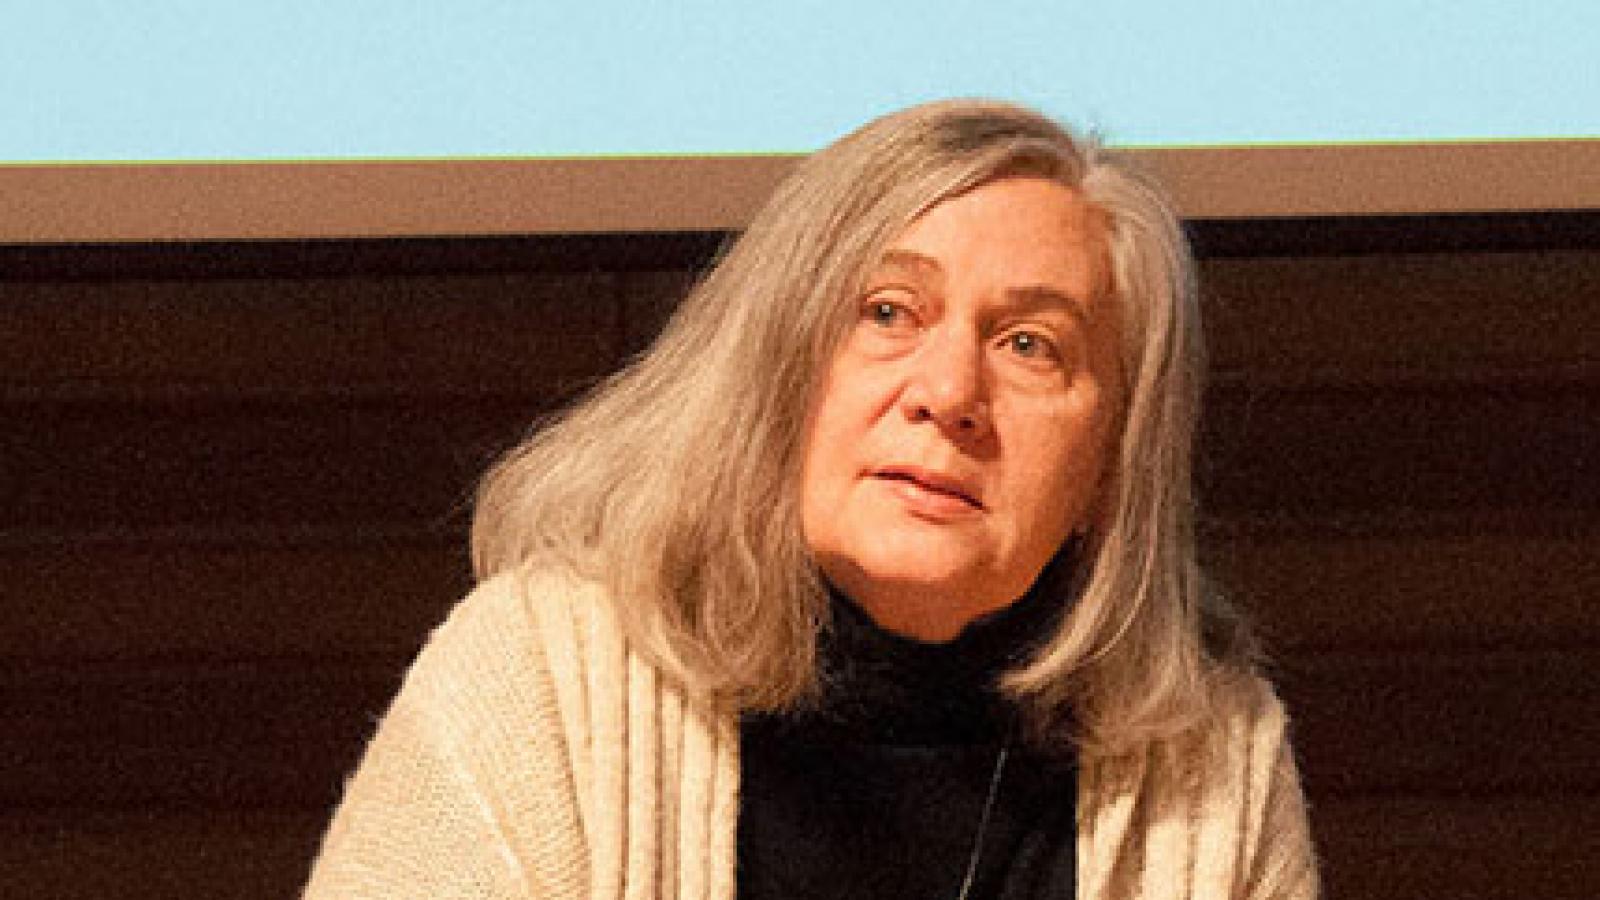 Marilynne Robinson sitting on a chair and talking to an audience.